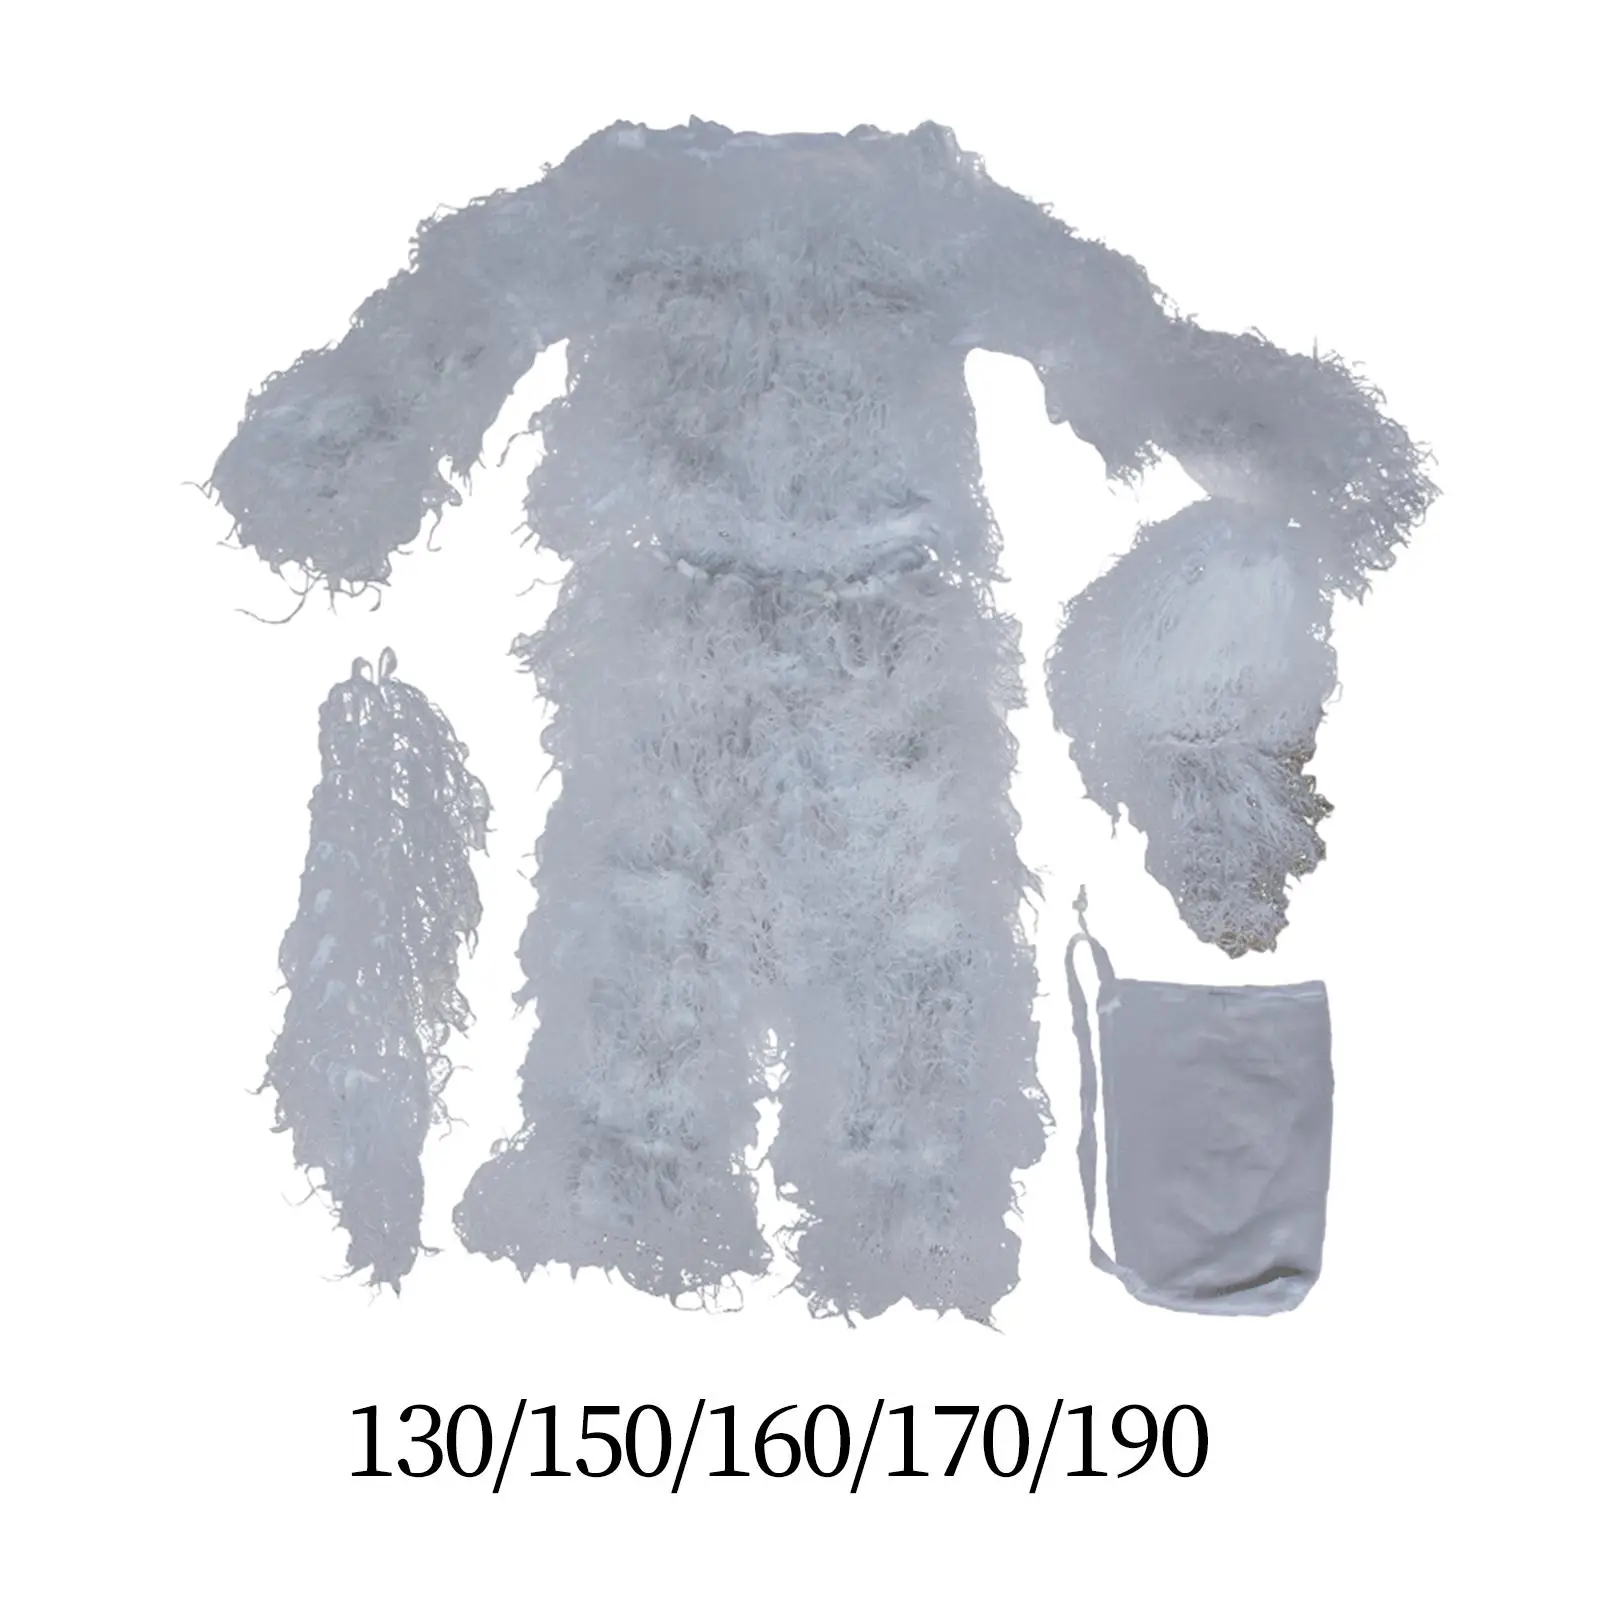 Ghillie Suit Hunting Suit Jacket and Pants Apparel Clothes for Bird Watching